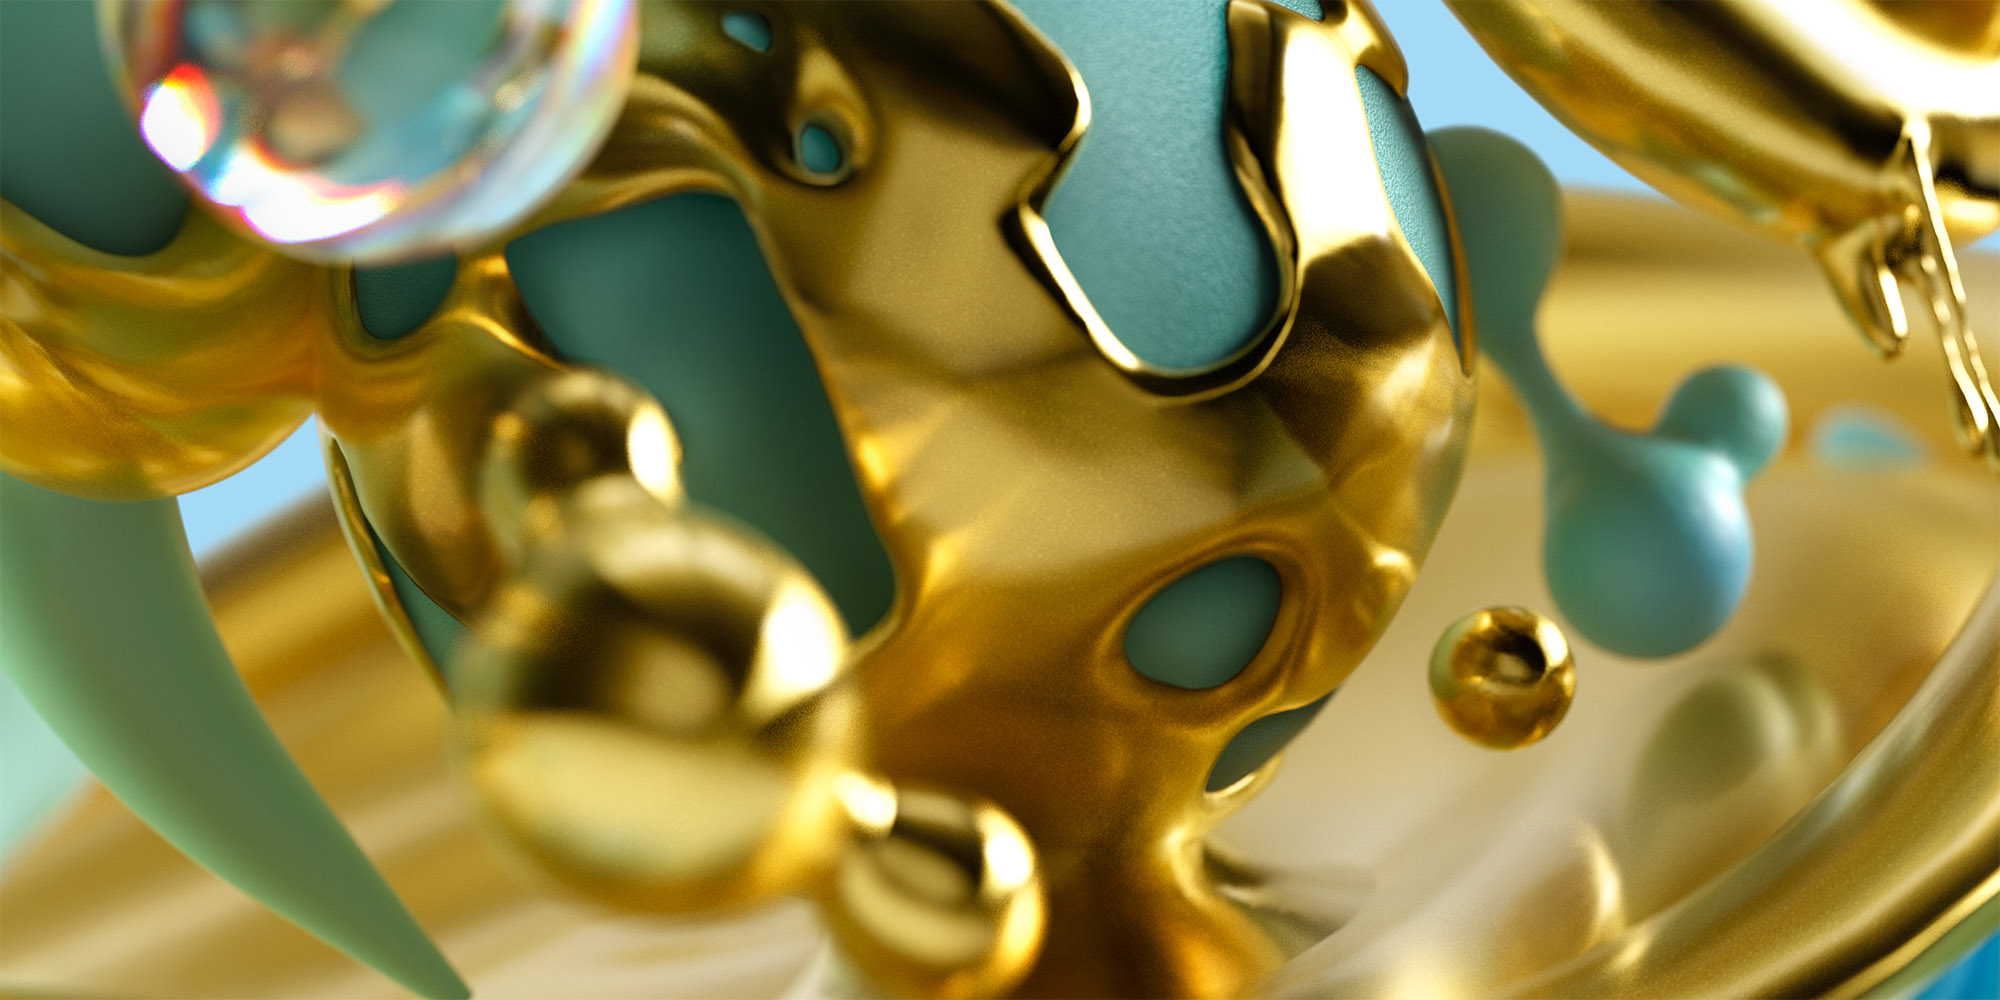 Metallic gold and matte teal liquids swirl together, touching and forming loose shapes but never mixing